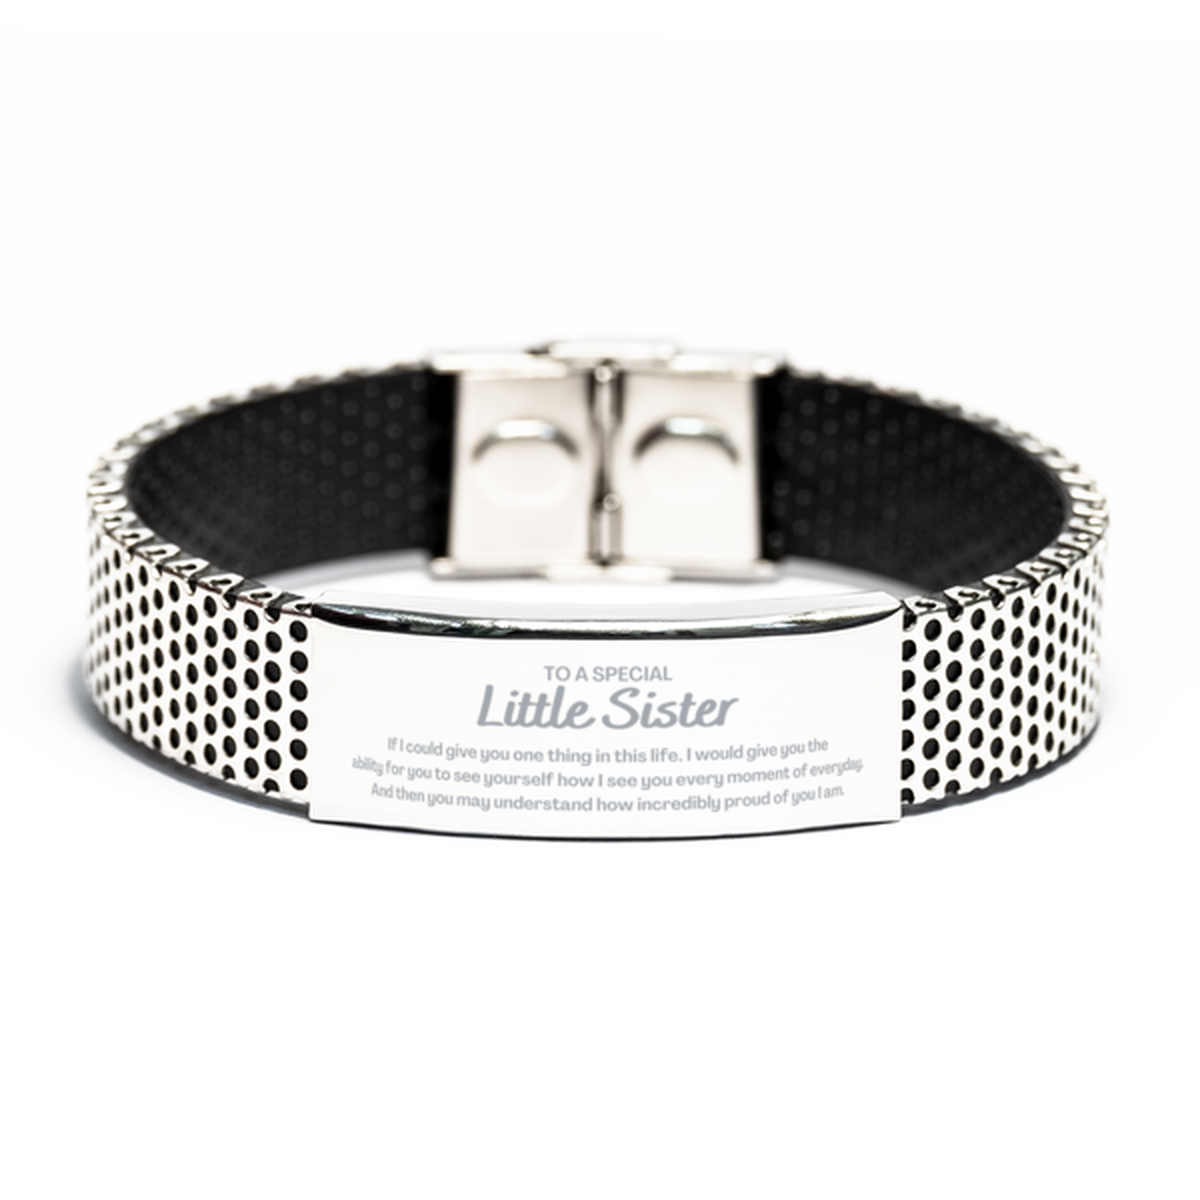 To My Little Sister Stainless Steel Bracelet, Gifts For Little Sister Engraved, Inspirational Gifts for Christmas Birthday, Epic Gifts for Little Sister To A Special Little Sister how incredibly proud of you I am